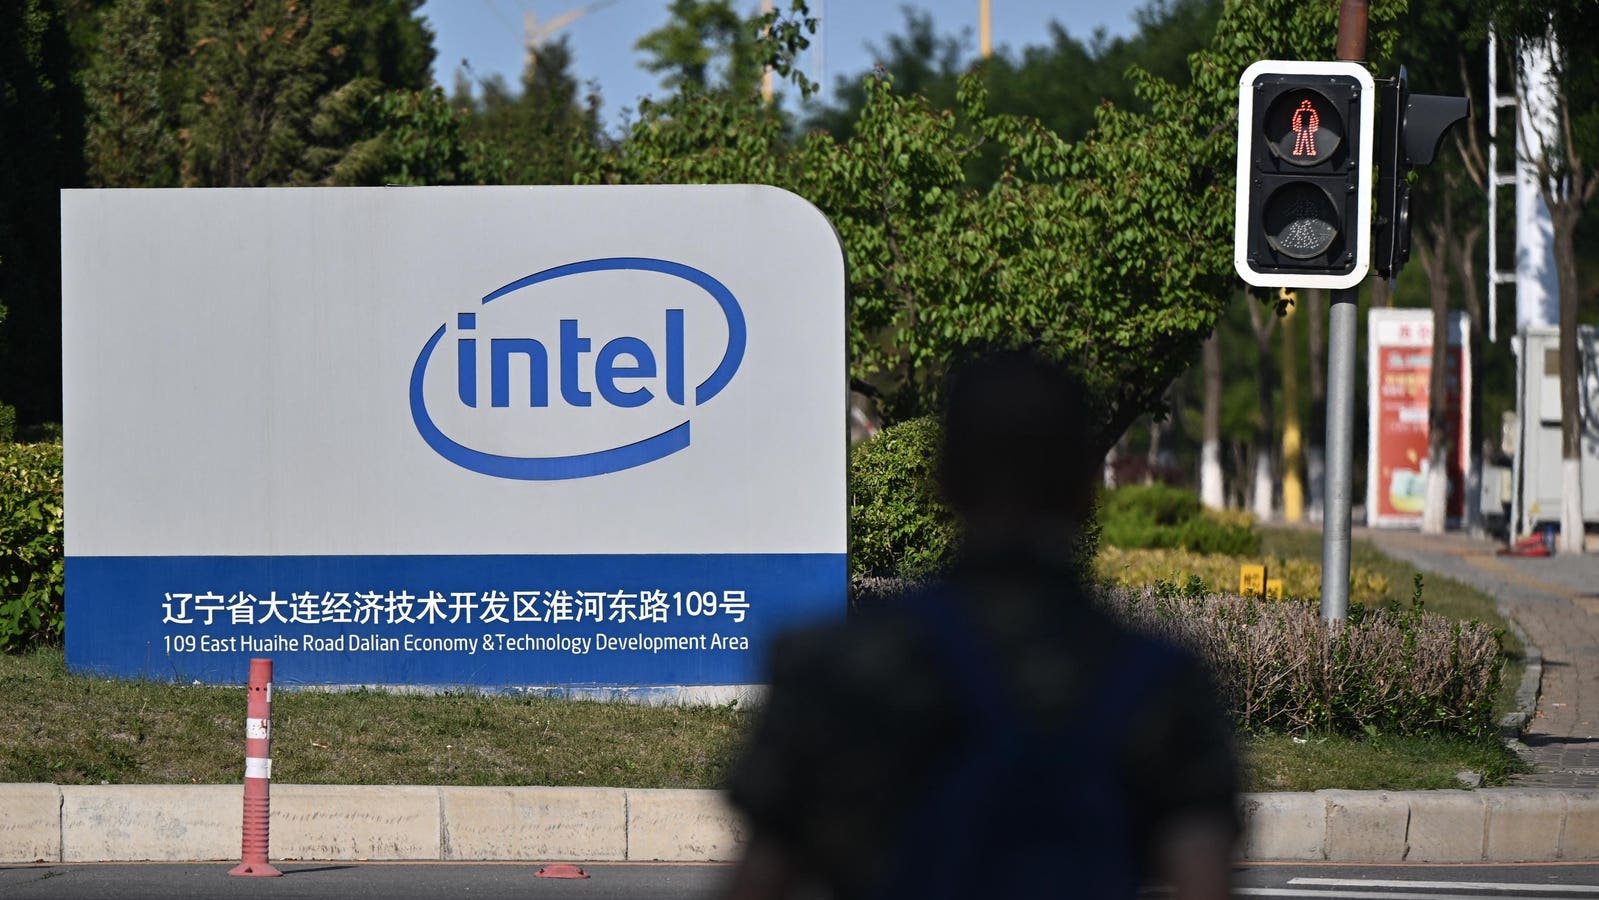 Intel Stock Rallies To 3-Month High As ‘Unloved’ AI Name Pares Losses